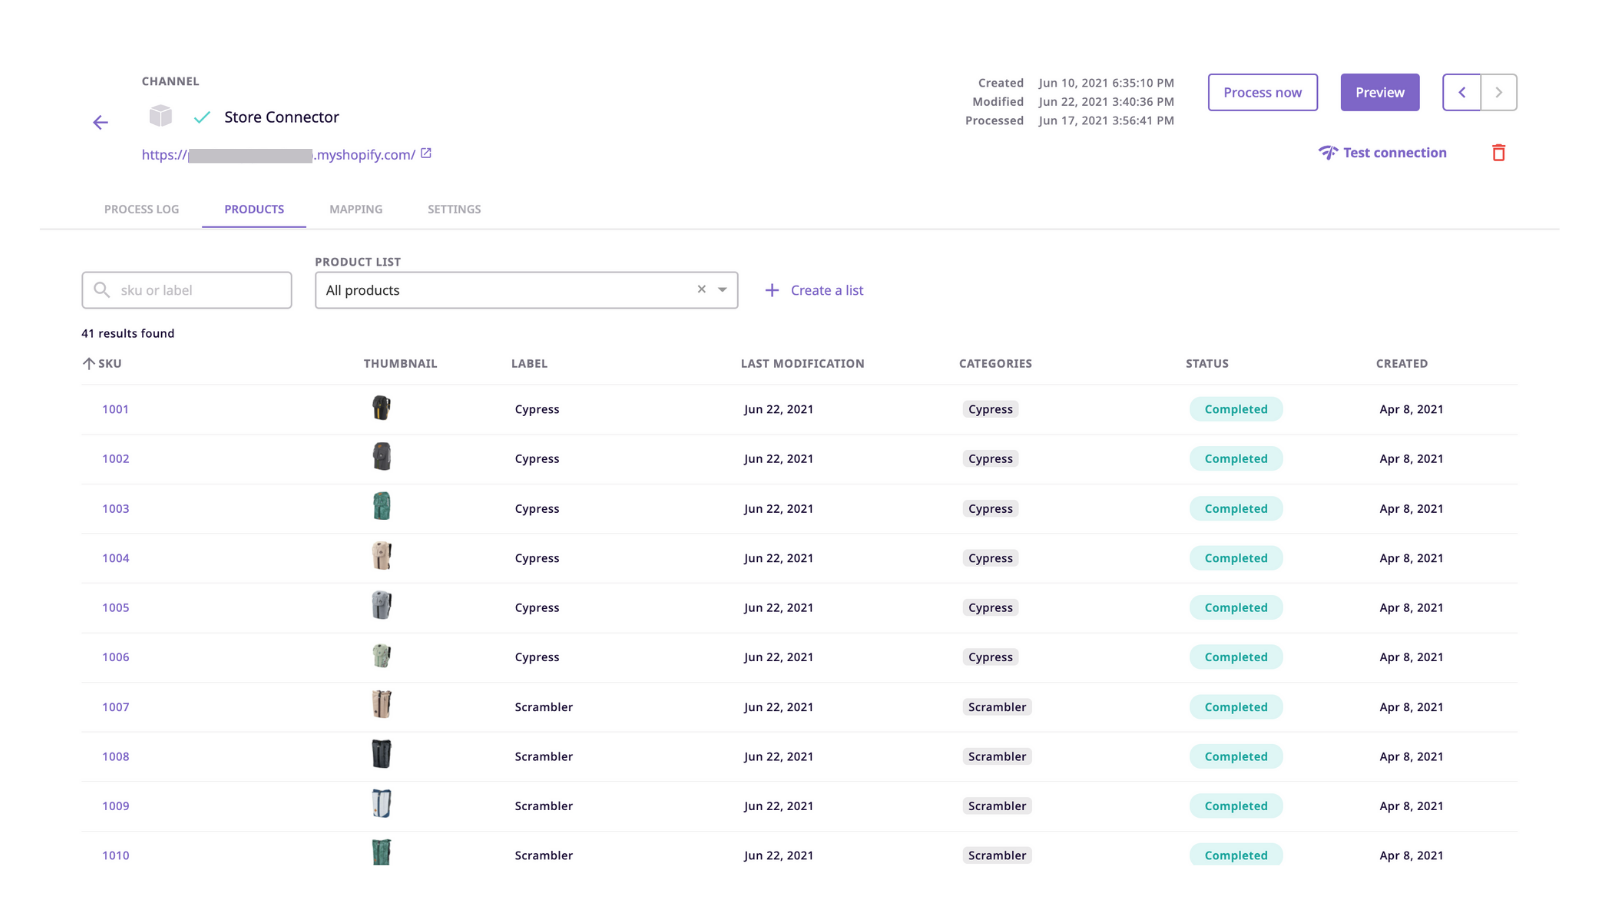 Product view before sending data to Shopify - SKUs and thumbnail information